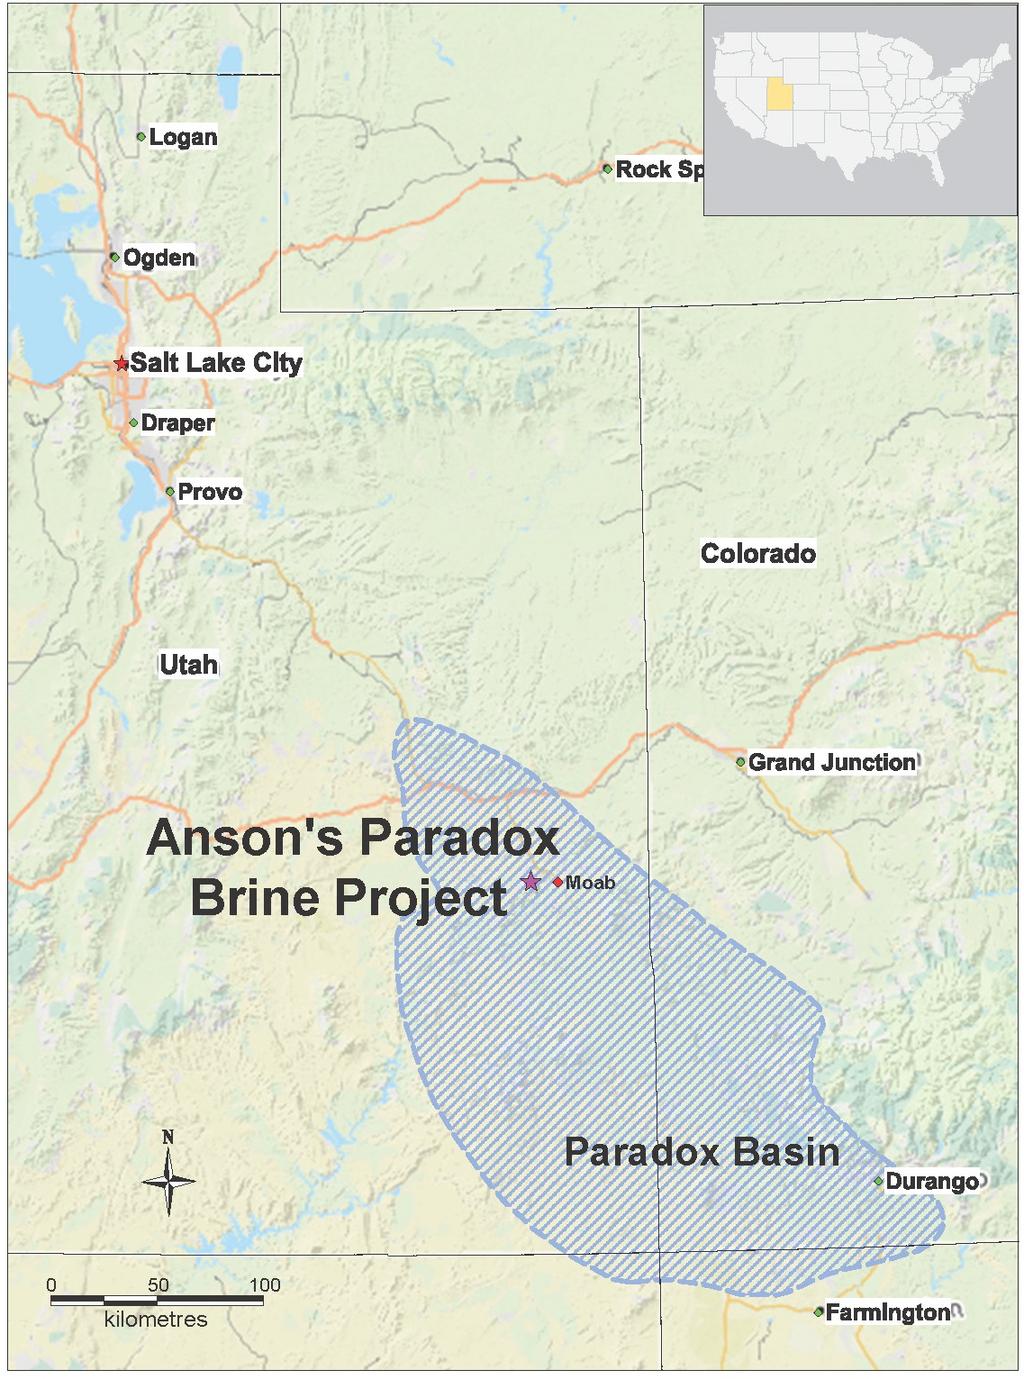 High lithium values have historically been recorded in close proximity to Anson s